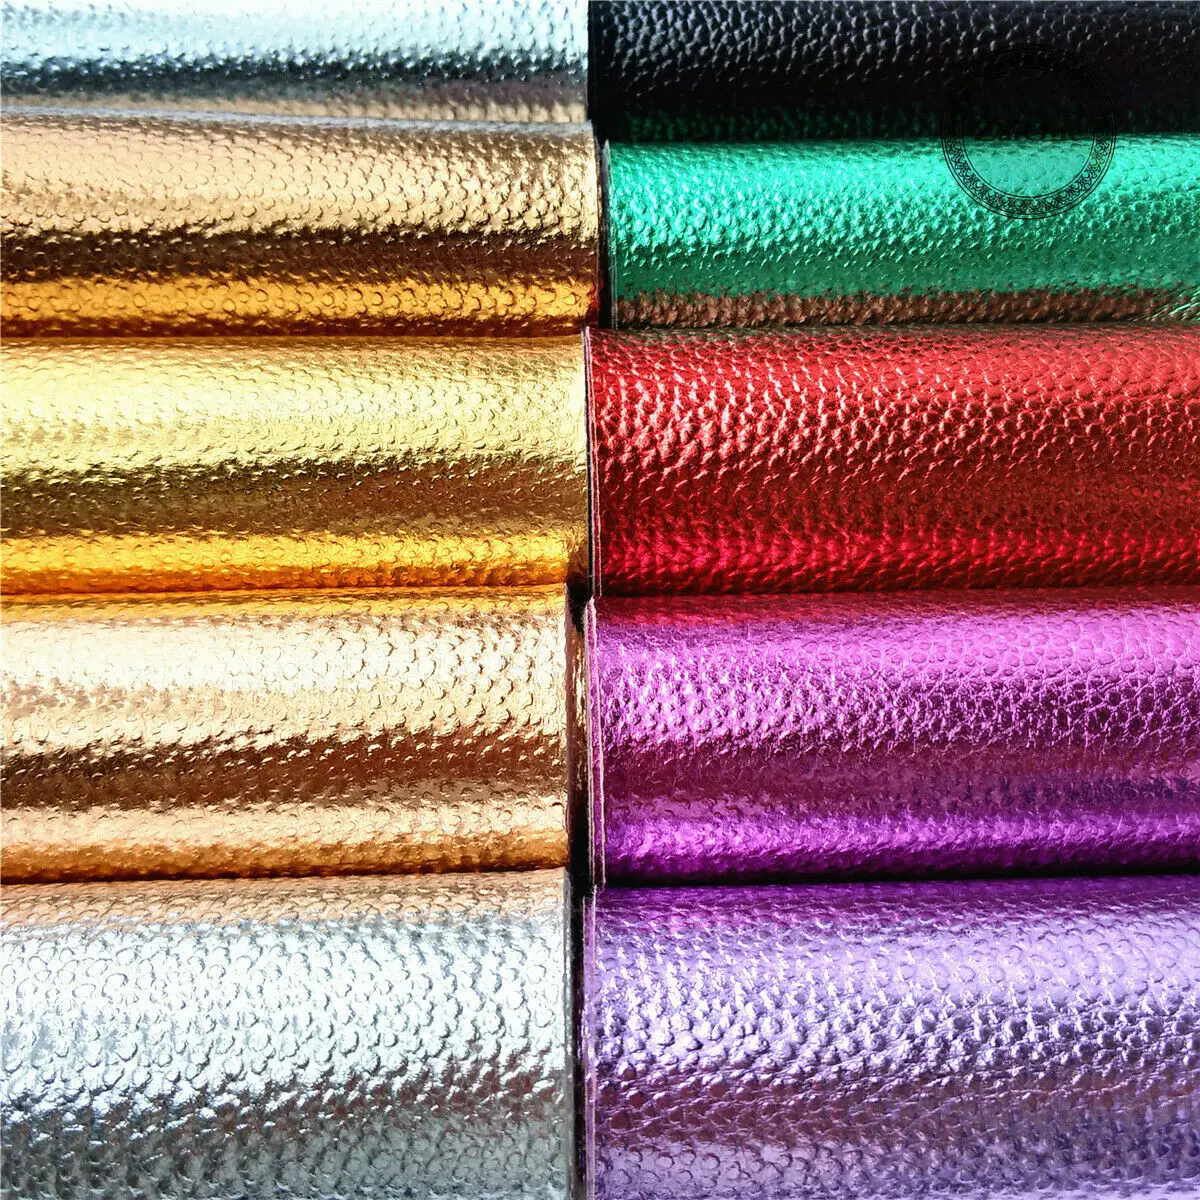  Faux Leather Fabric Leather Fabric Vinyl Leatherette Vinyl PVC  Waterproof Fabric for Bows Earrings Handbag Wallet Sewing Craft Making  (Size:138cm5m,Color:Coffee Color)